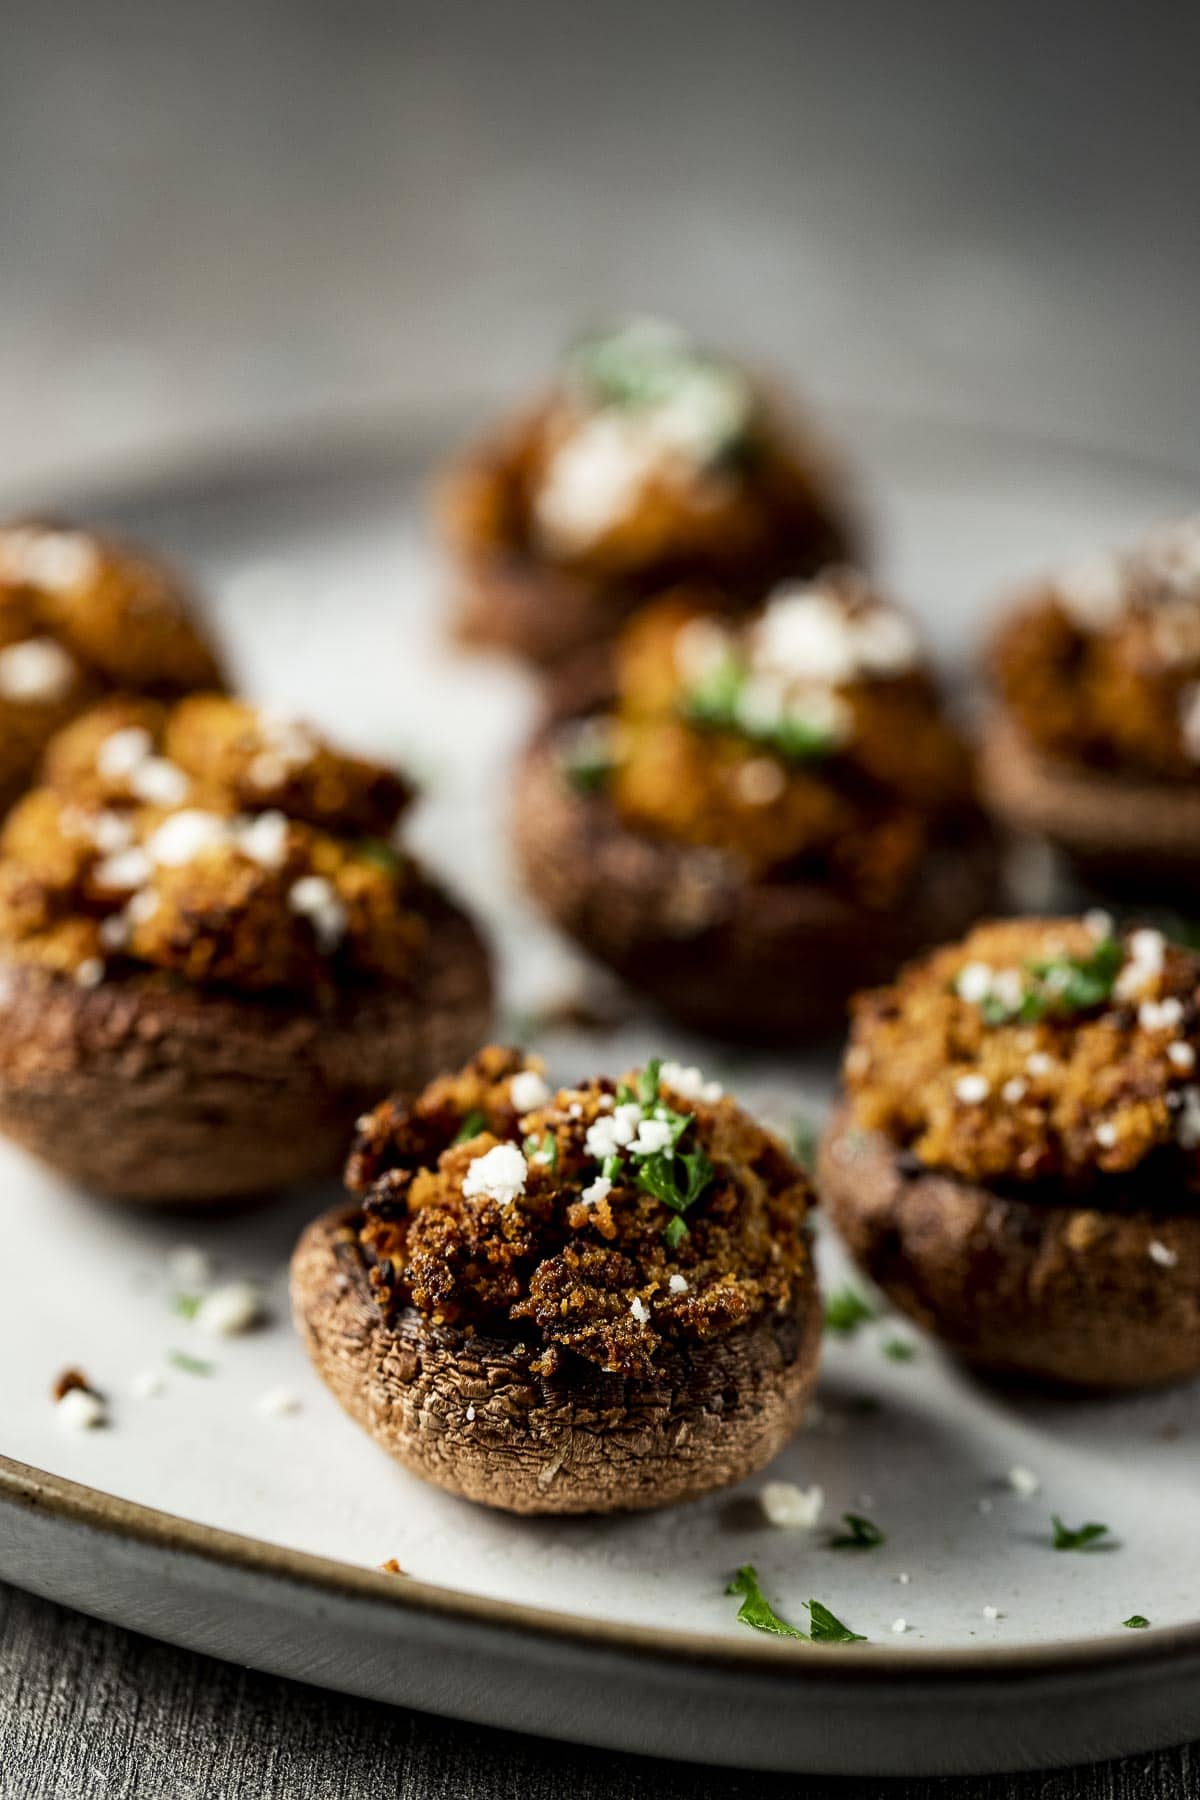 Side view of air fried stuffed mushrooms on a plate.